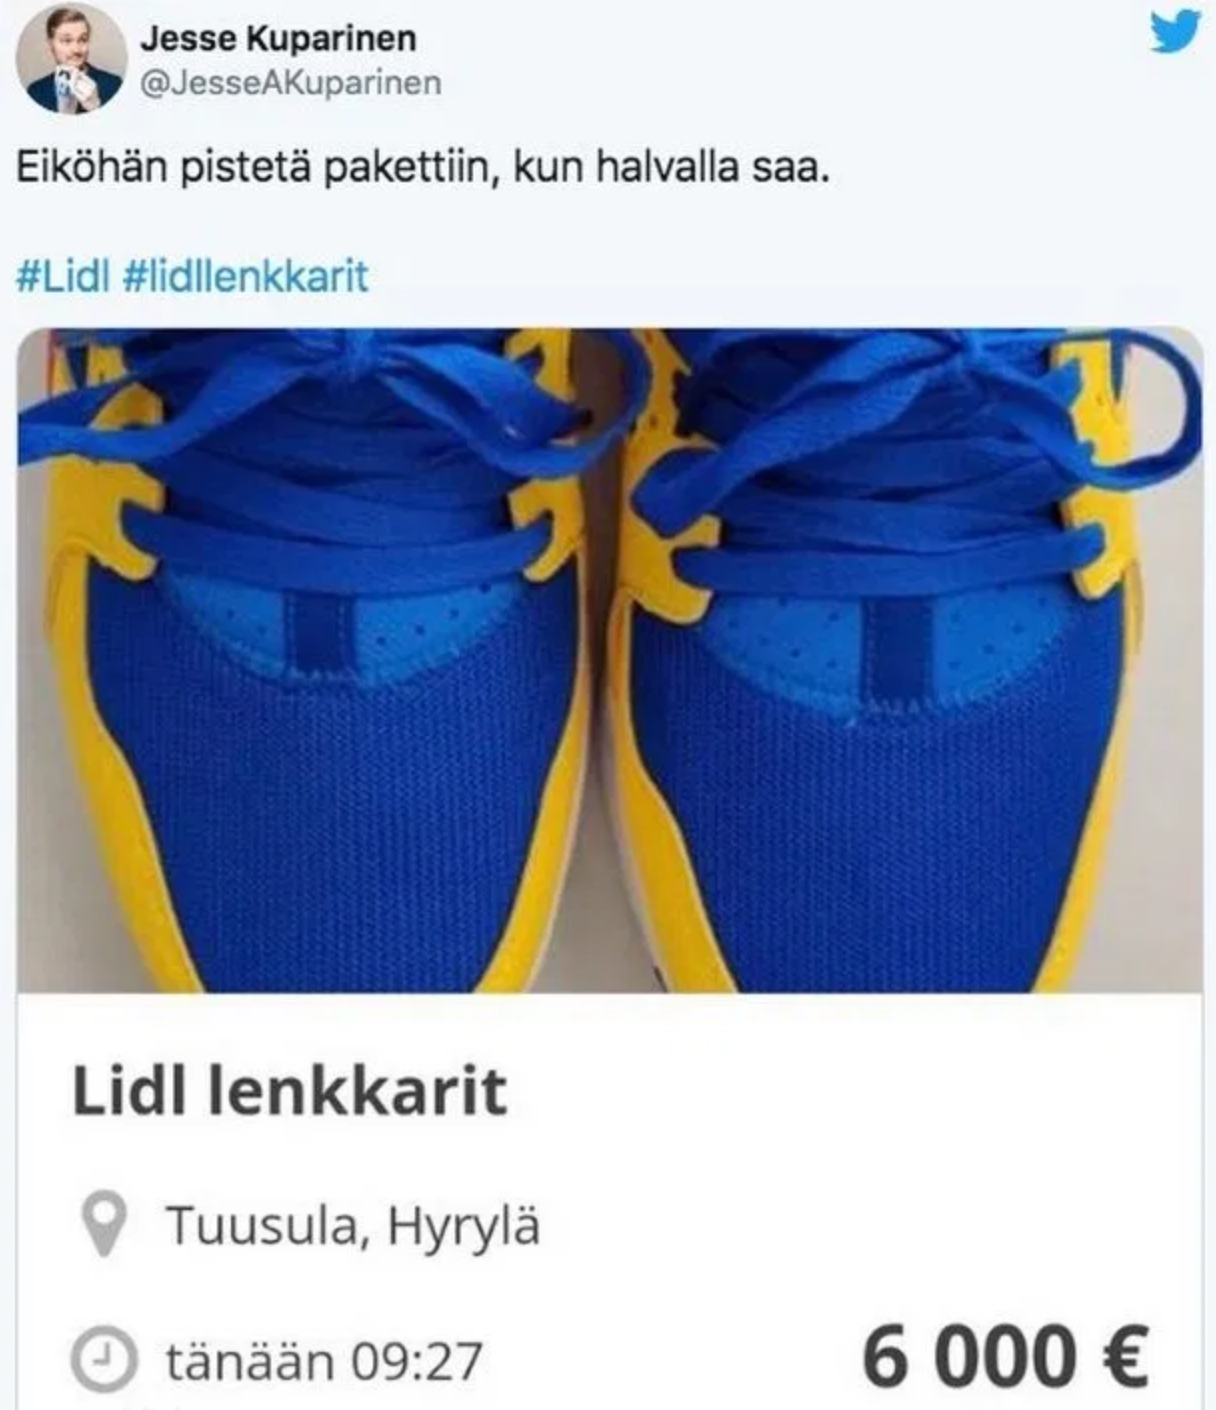 Shoes lidl Sneakers Limited Edition 2020-size EU 38/UK 5 NEW RARE UNISEX